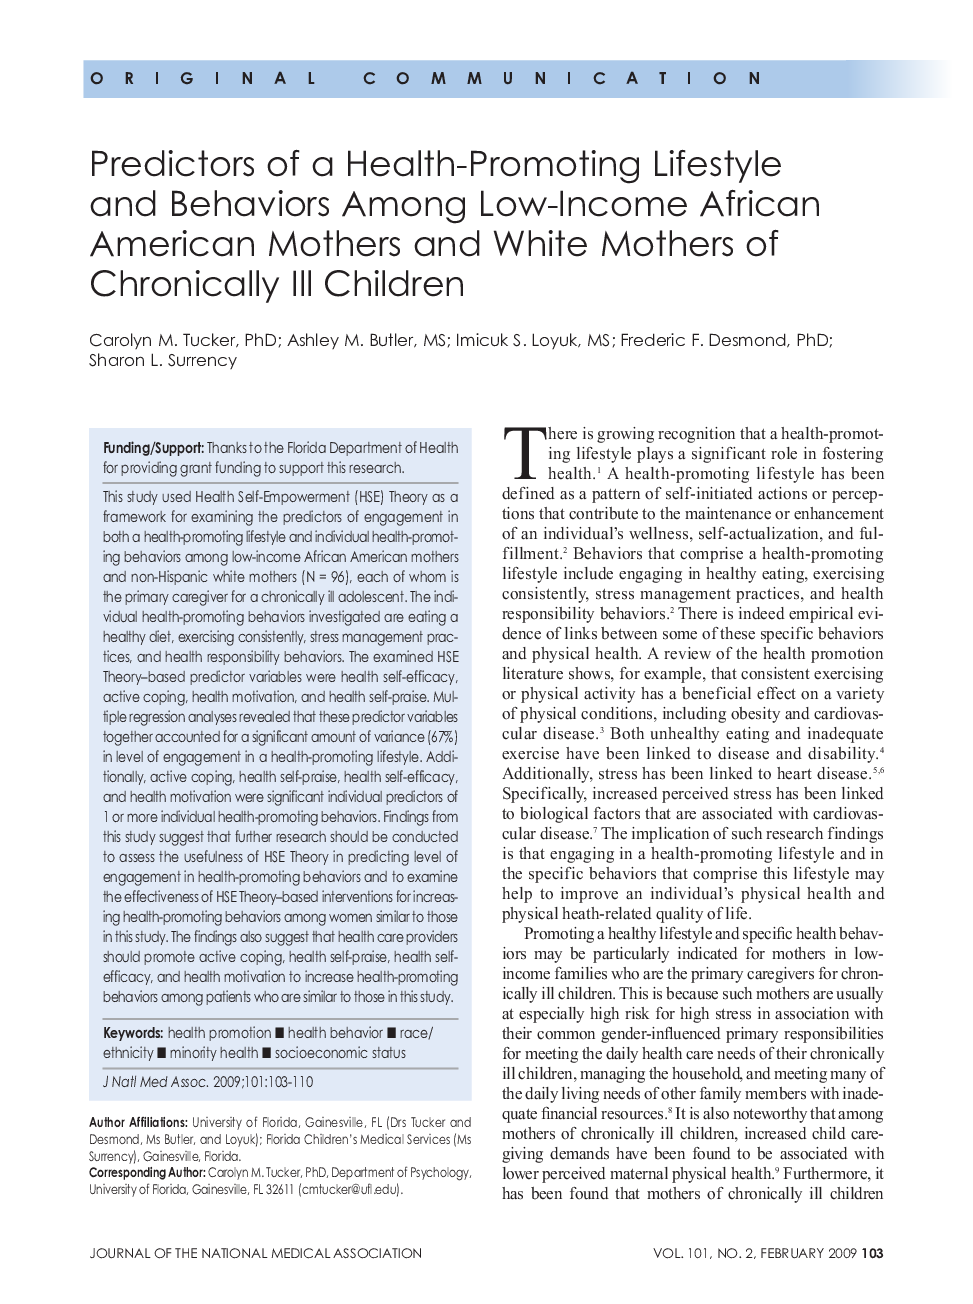 Predictors of a Health-Promoting Lifestyle and Behaviors Among Low-Income African American Mothers and White Mothers of Chronically Ill Children